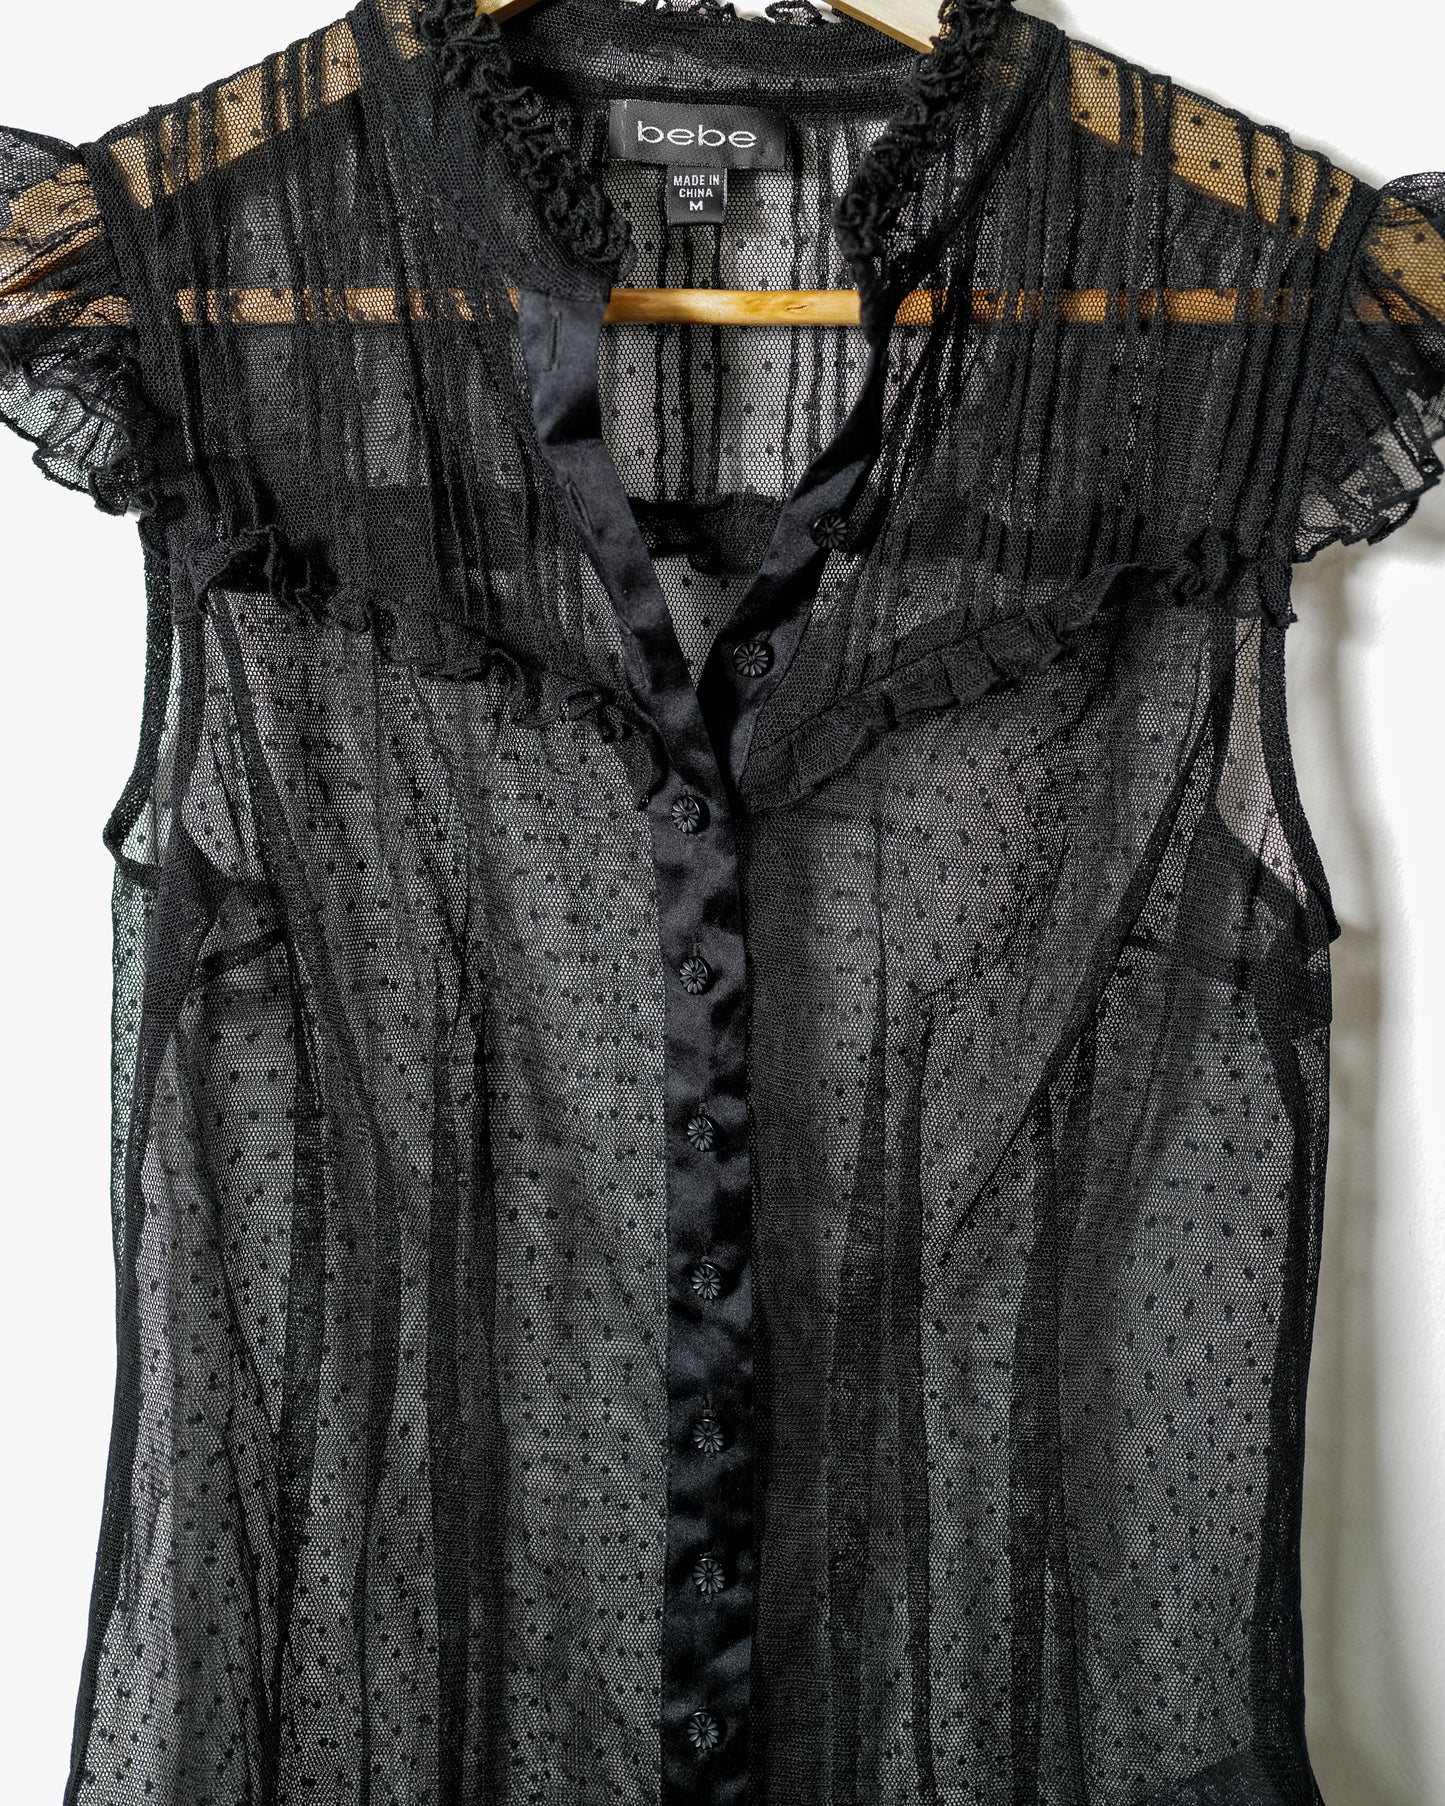 Sheer Top - Size Small